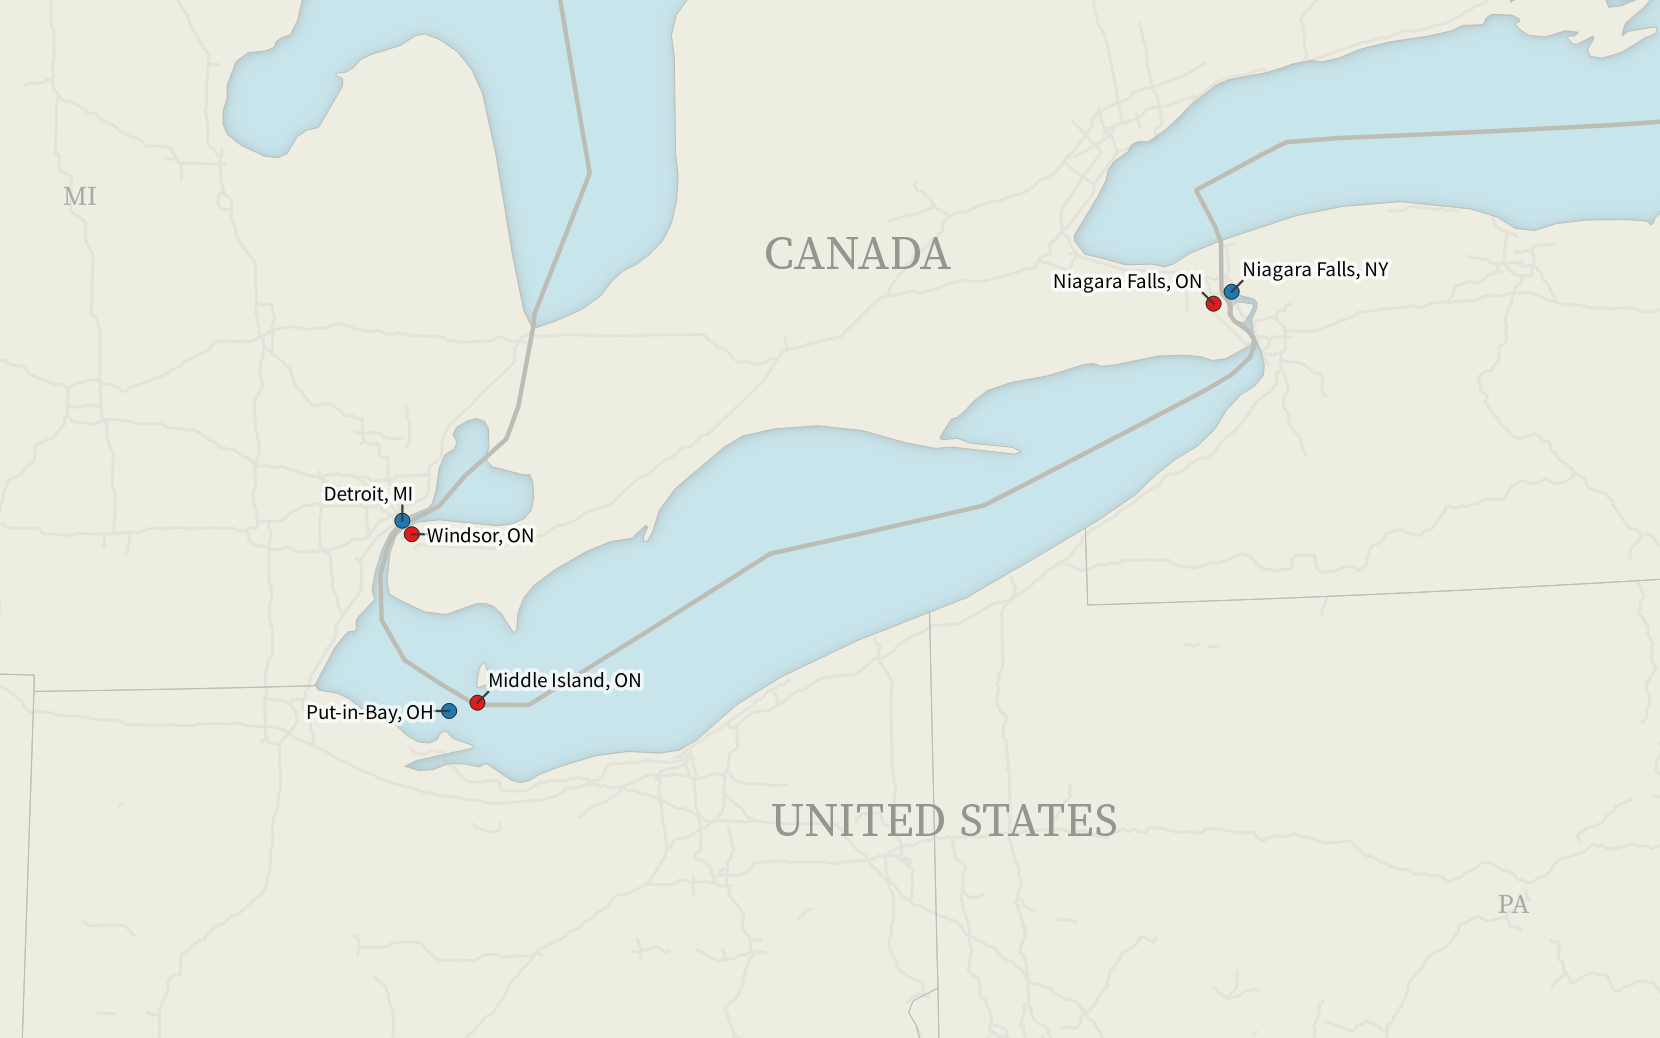 A map of the United States and Canada around Lake Erie and western Lake Ontario. Detroit, MI is paired with Windsor, ON. Put-in-Bay, OH is paired with Middle Island, ON. Niagara Falls, NY is paired with Niagara Falls, ON.